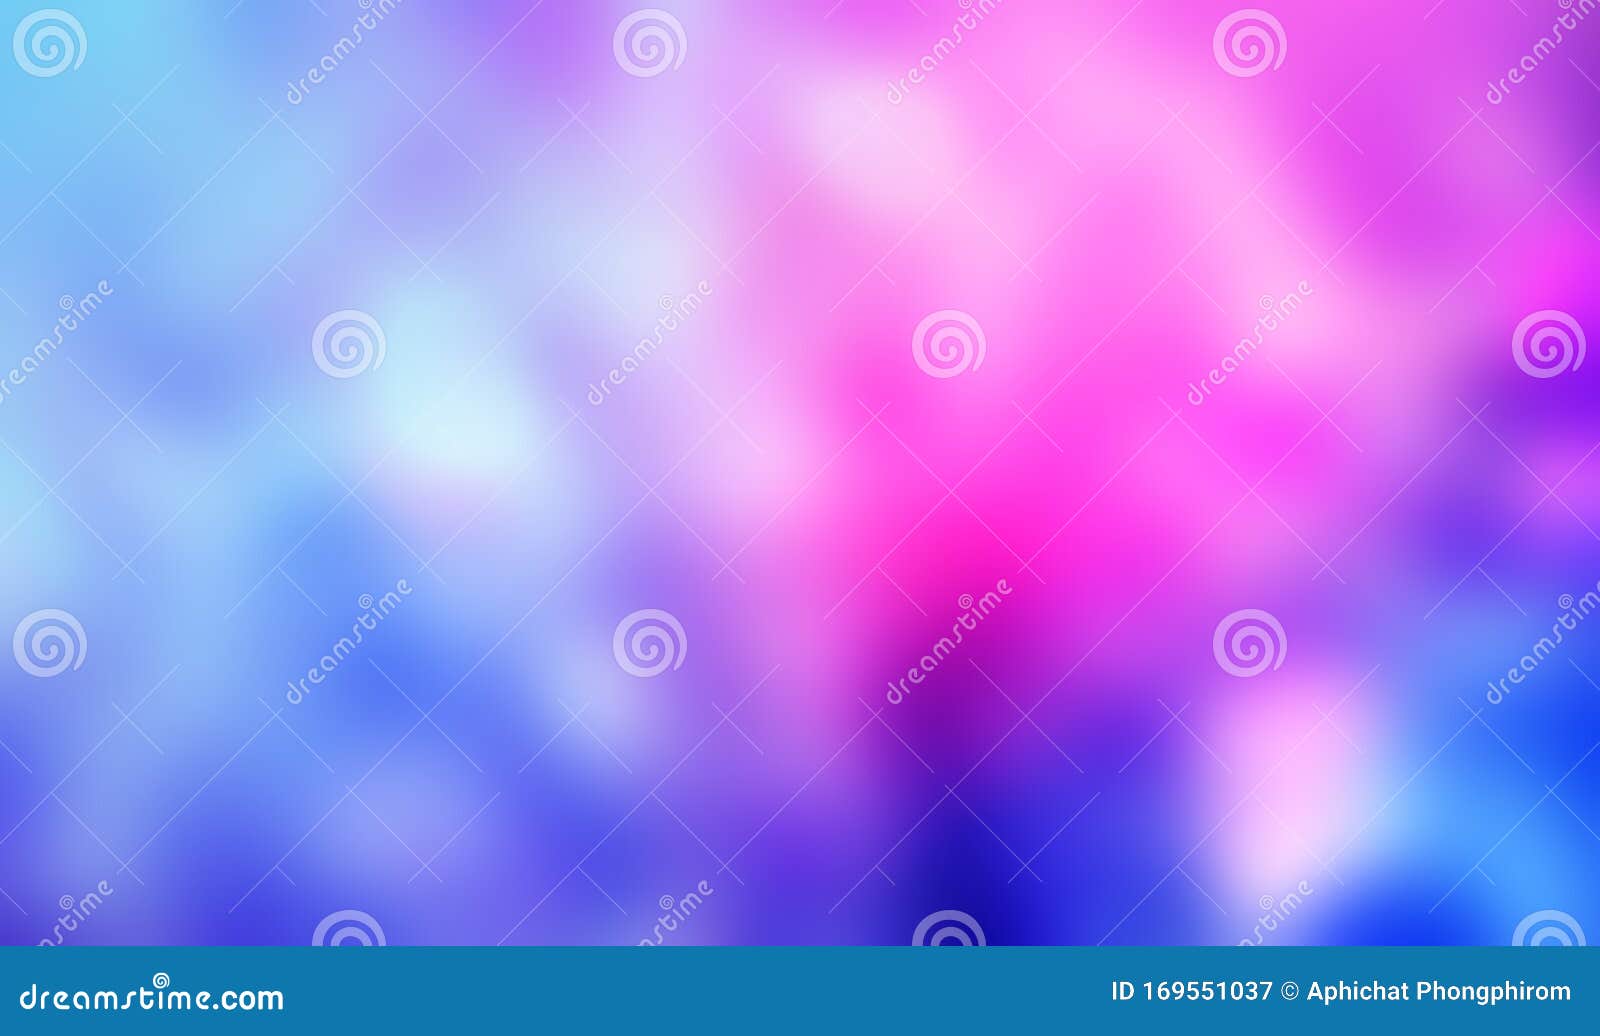 Pastel Colors, Rainbow, Soft Abstract Images Used As Beautiful Wallpapers  and Computer Screens. Stock Illustration - Illustration of magenta,  blurred: 169551037